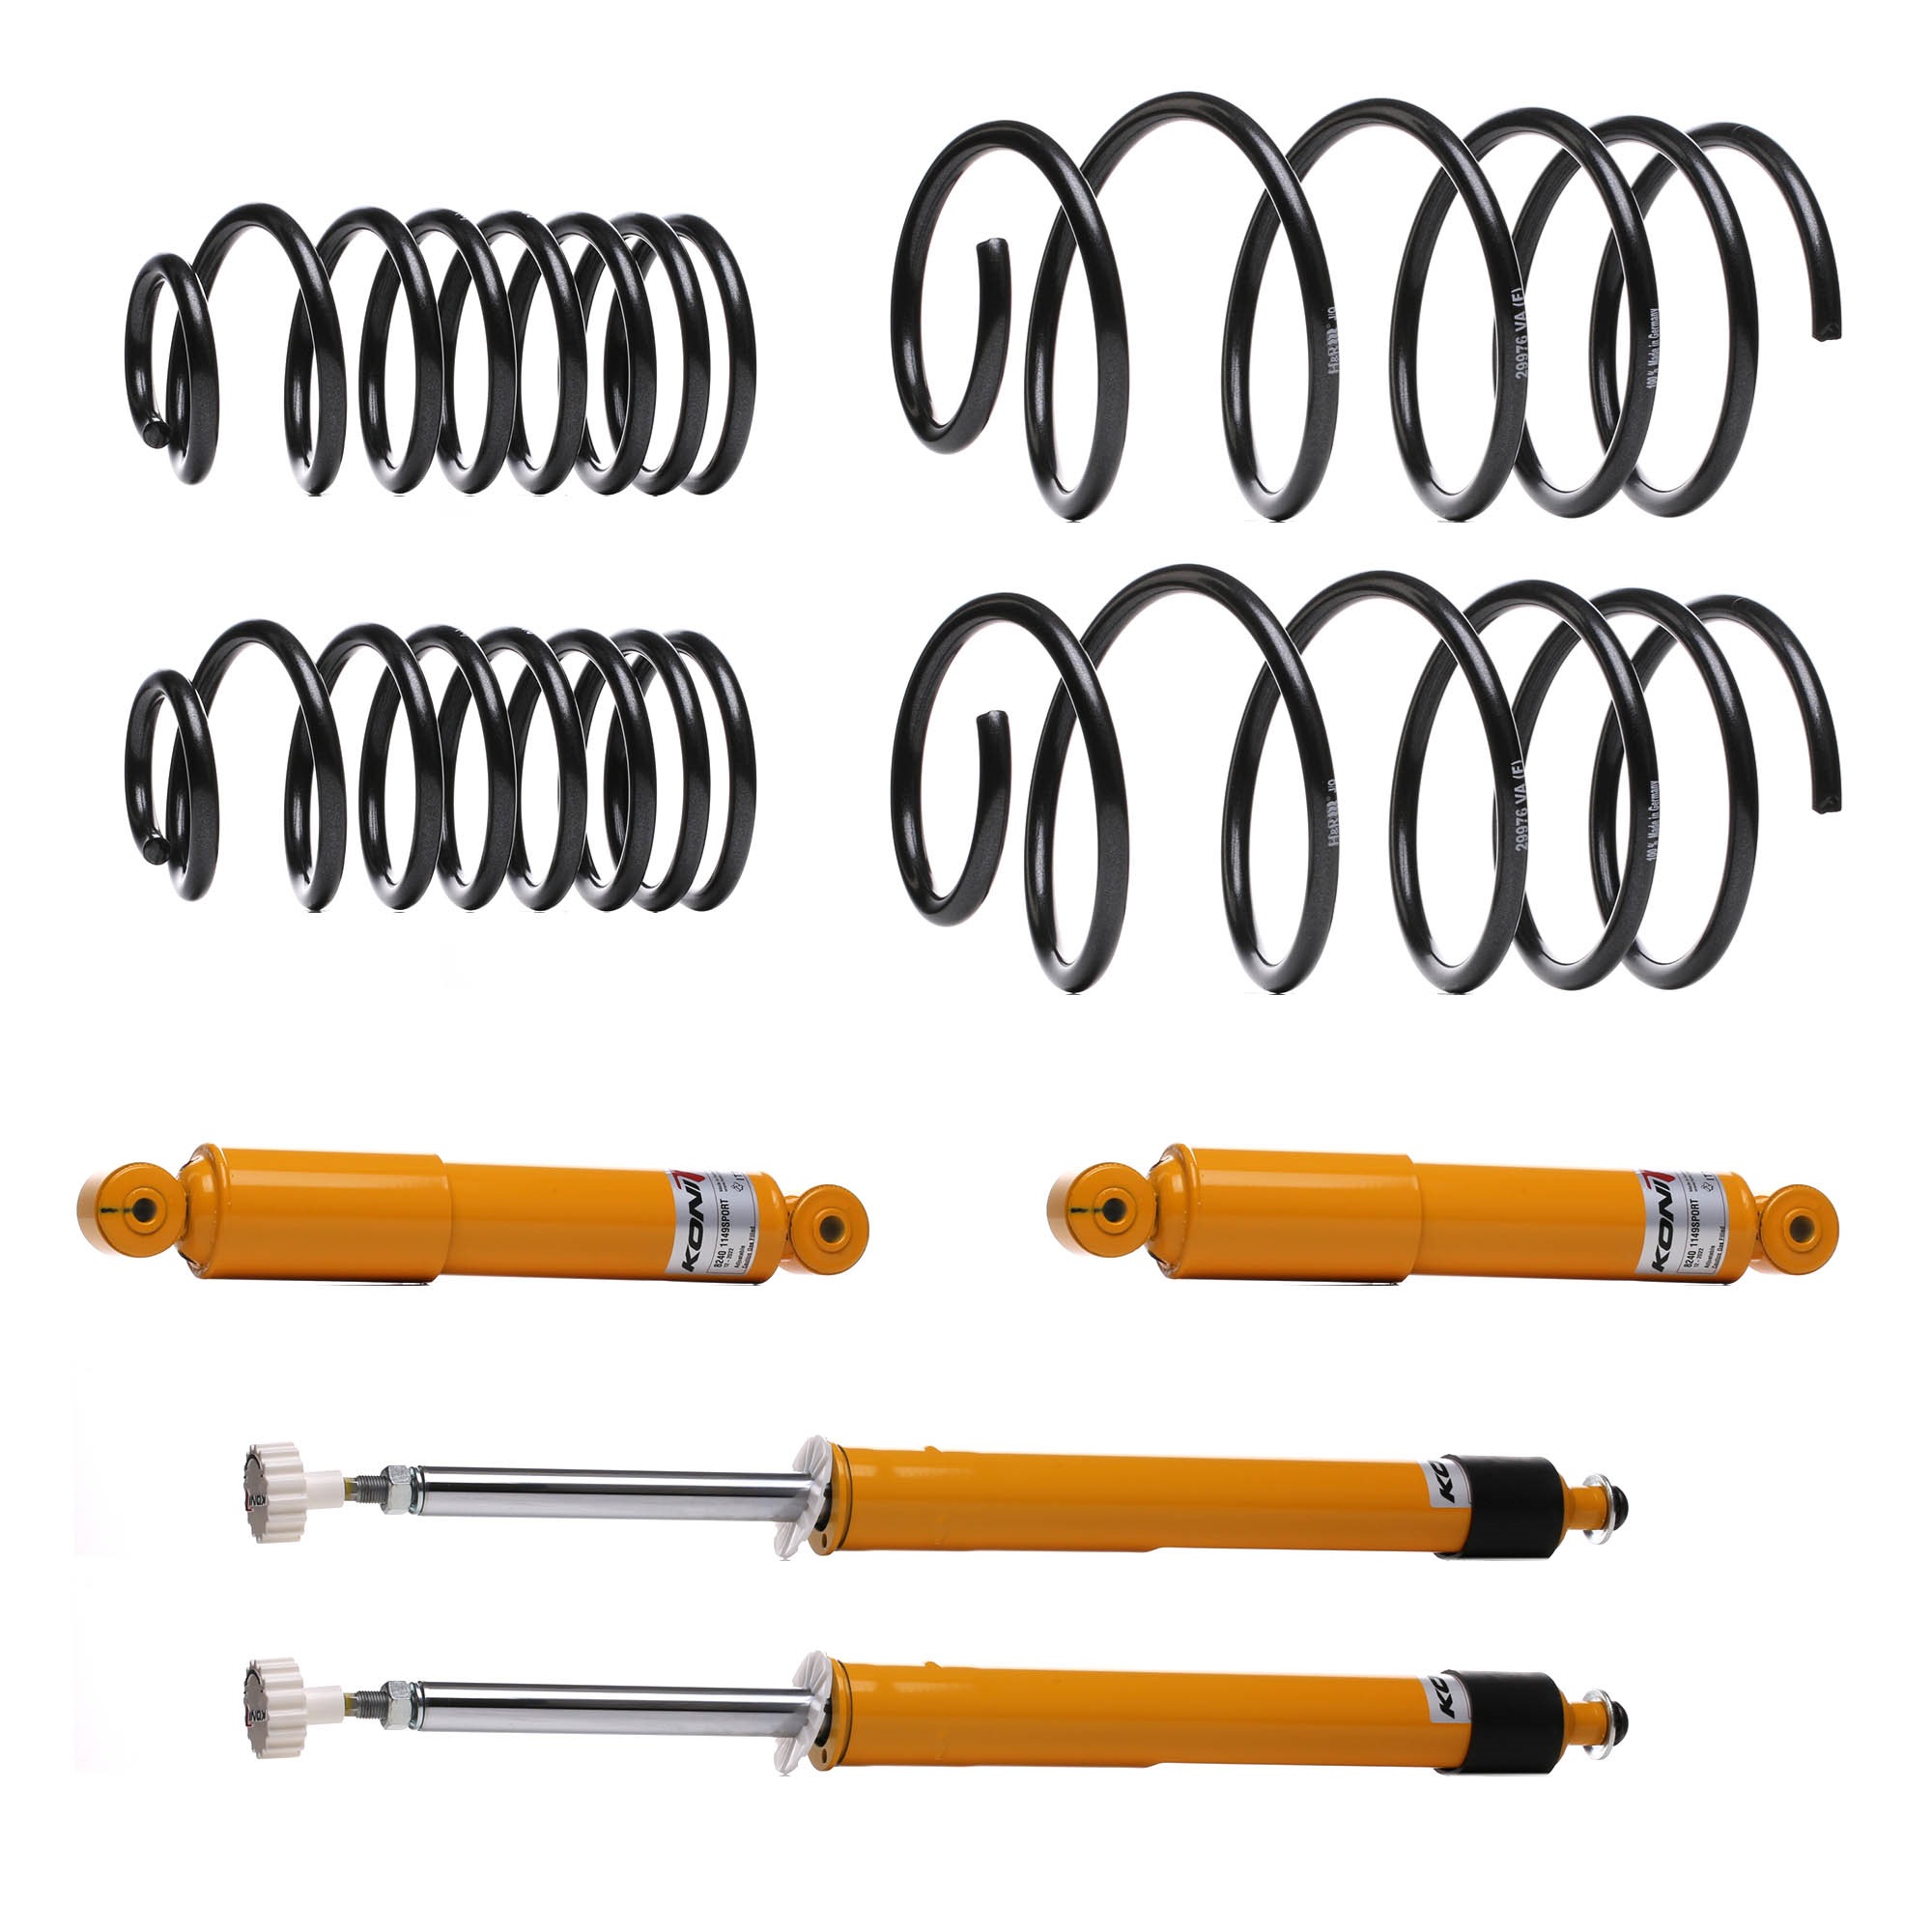 Original 1140-9761 KONI Suspension kit, coil springs / shock absorbers experience and price